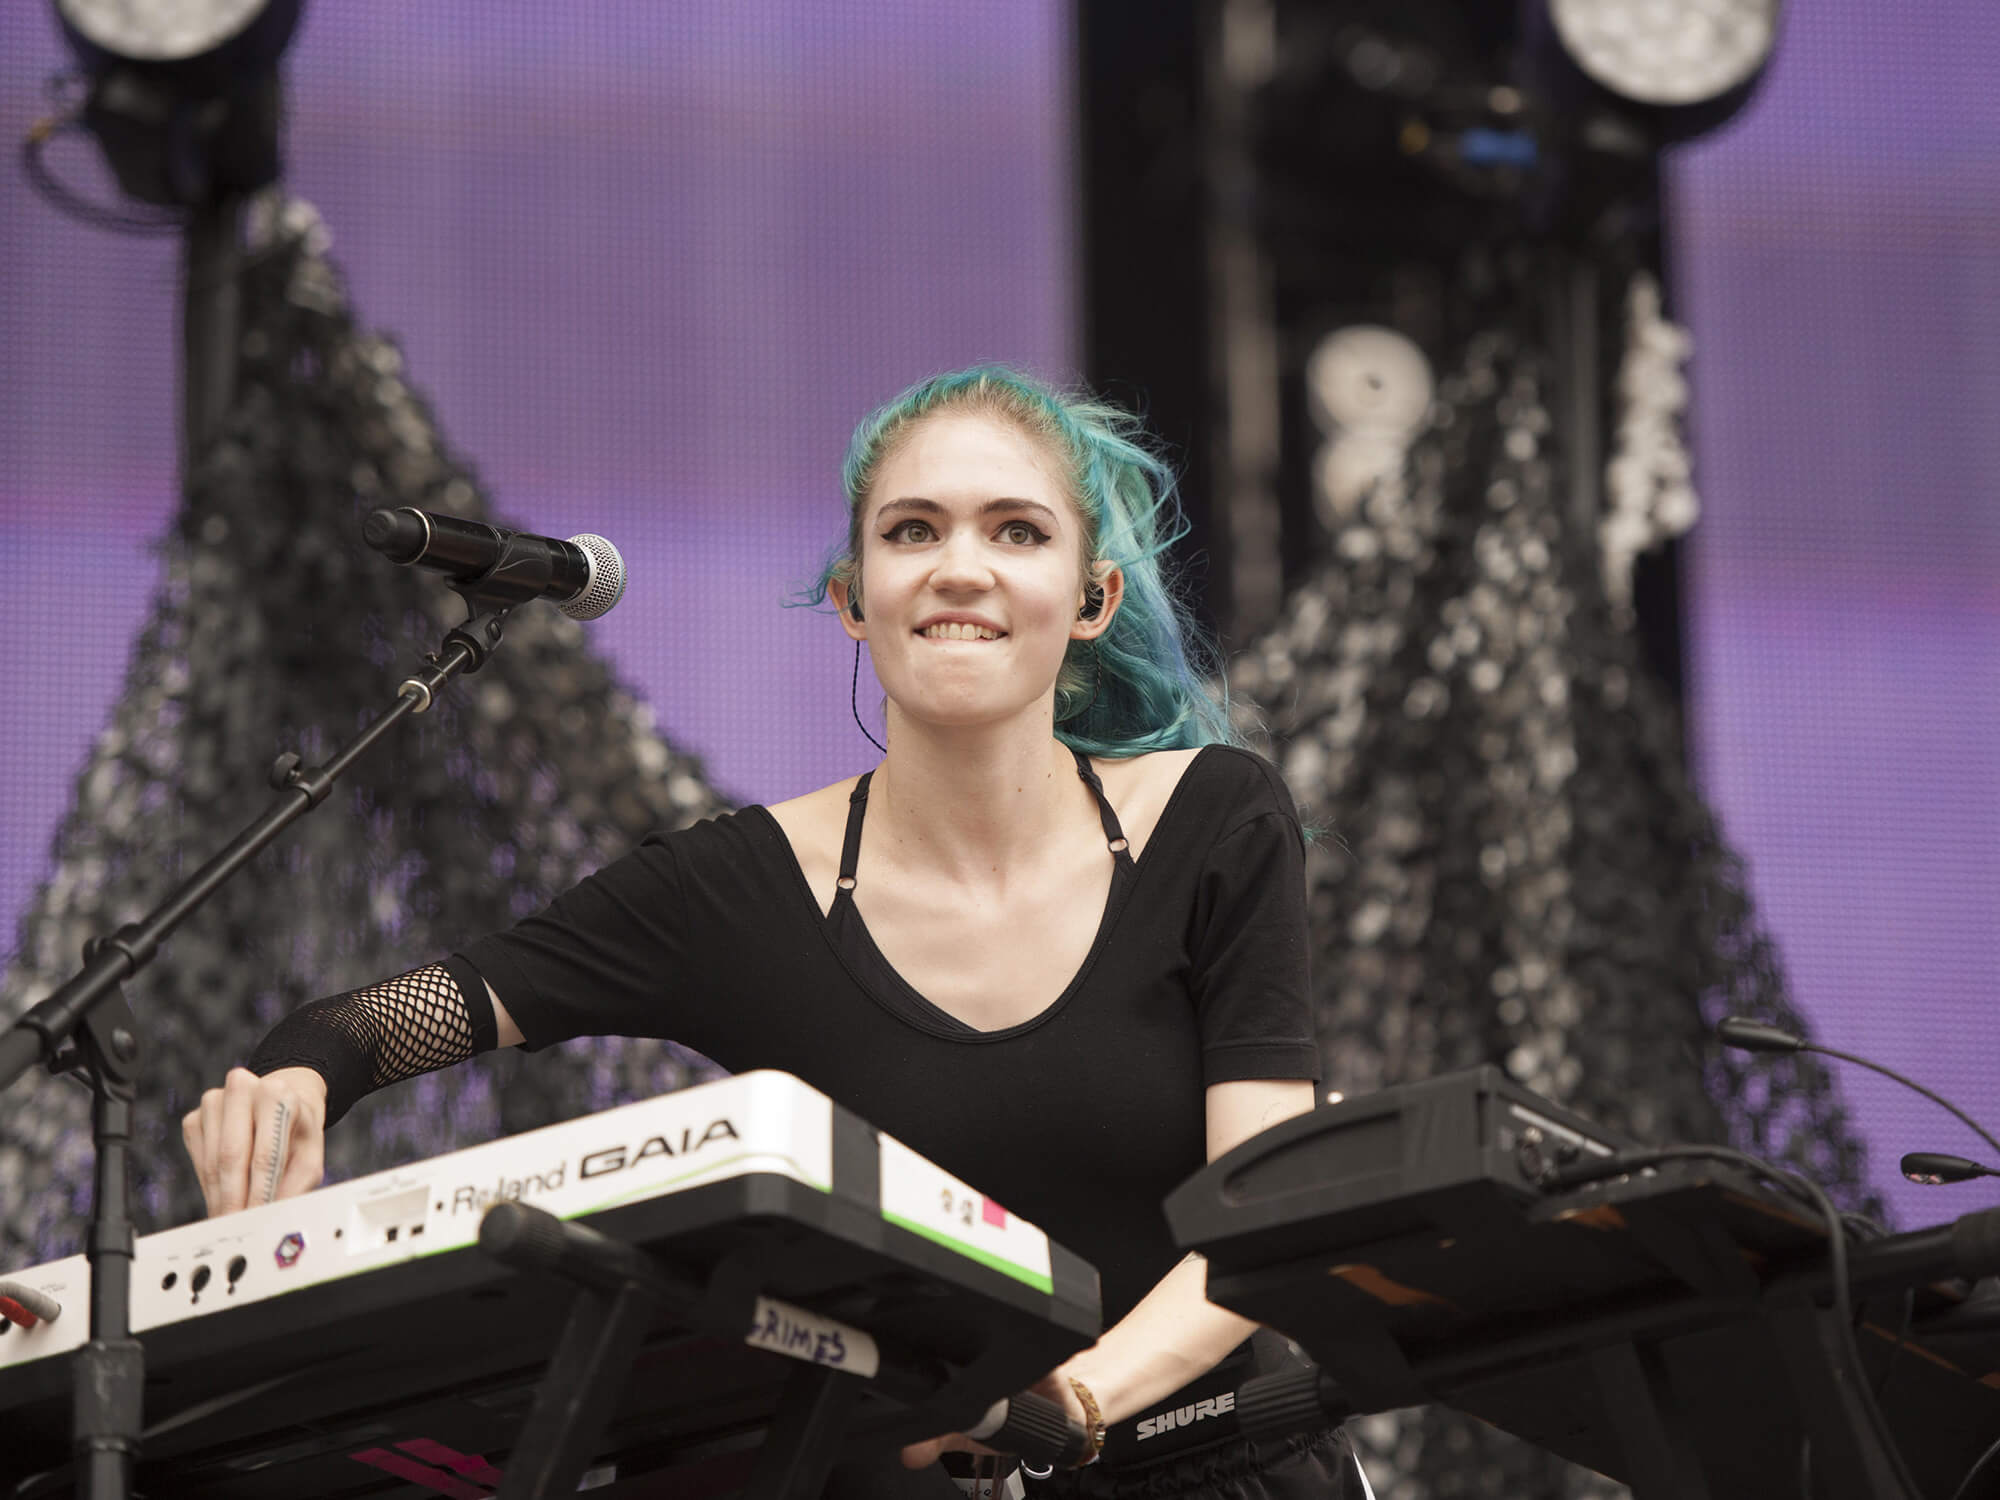 Grimes hints at changing her “main day job” from music after releasing her next album in 2022 | MusicTech